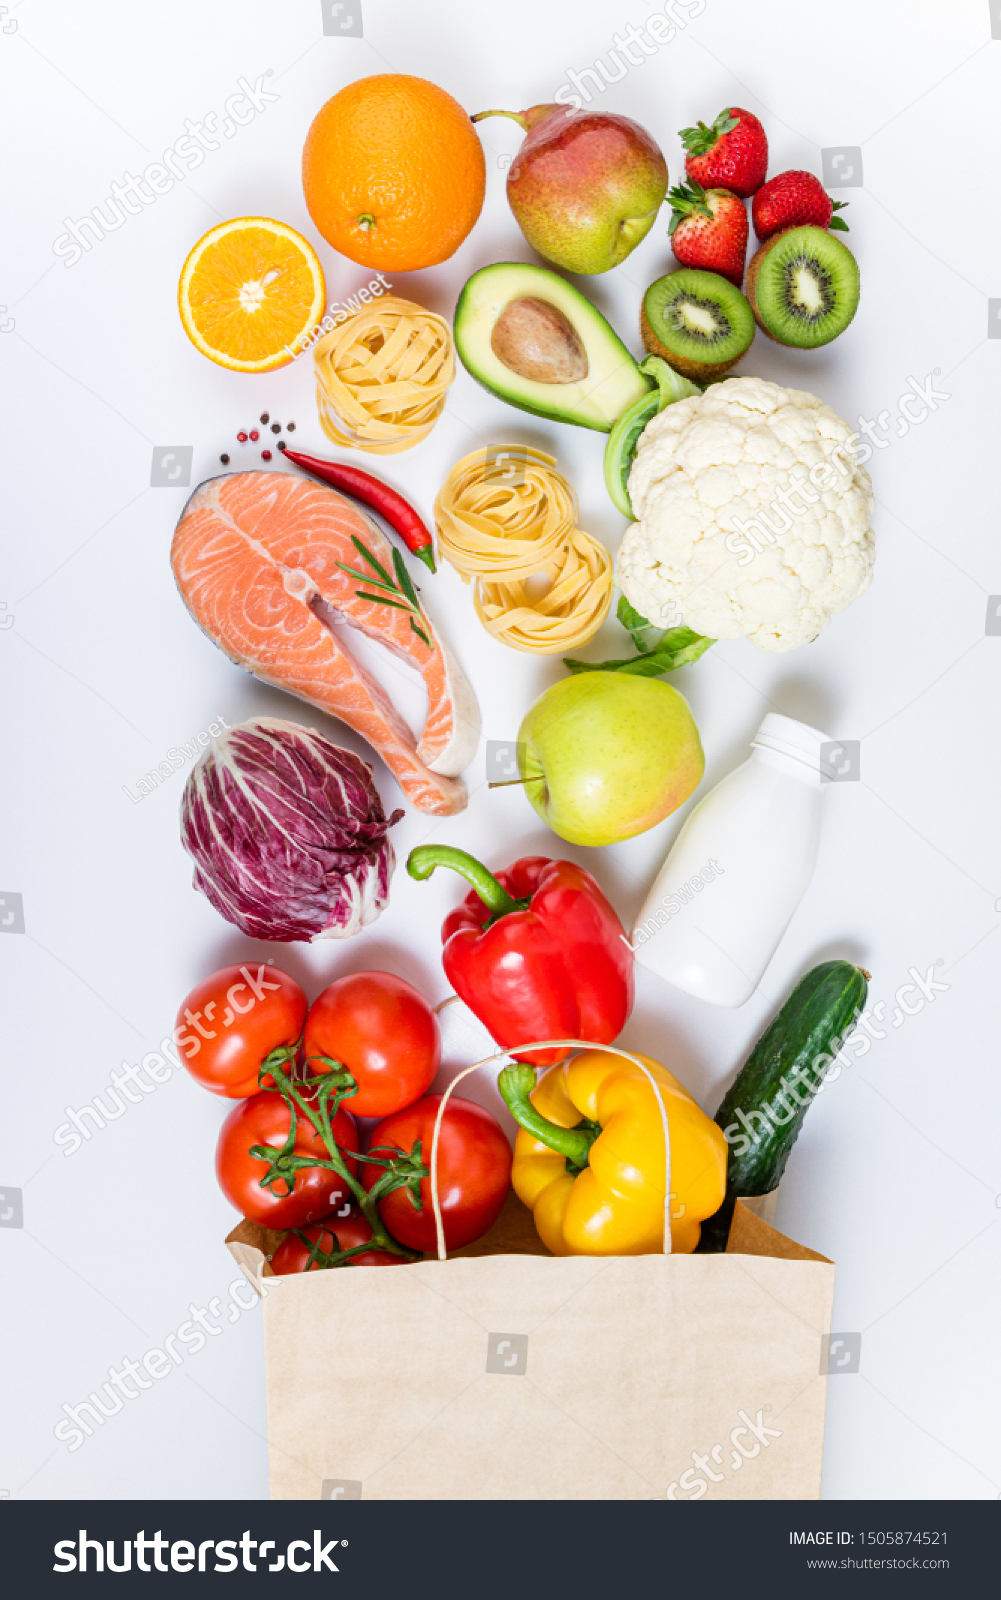 Healthy food background. Healthy food in paper bag fruits, vegetables, milk, pasta and fish on white background. Shopping food supermarket, meal and nutrition plan concept. Top view #1505874521